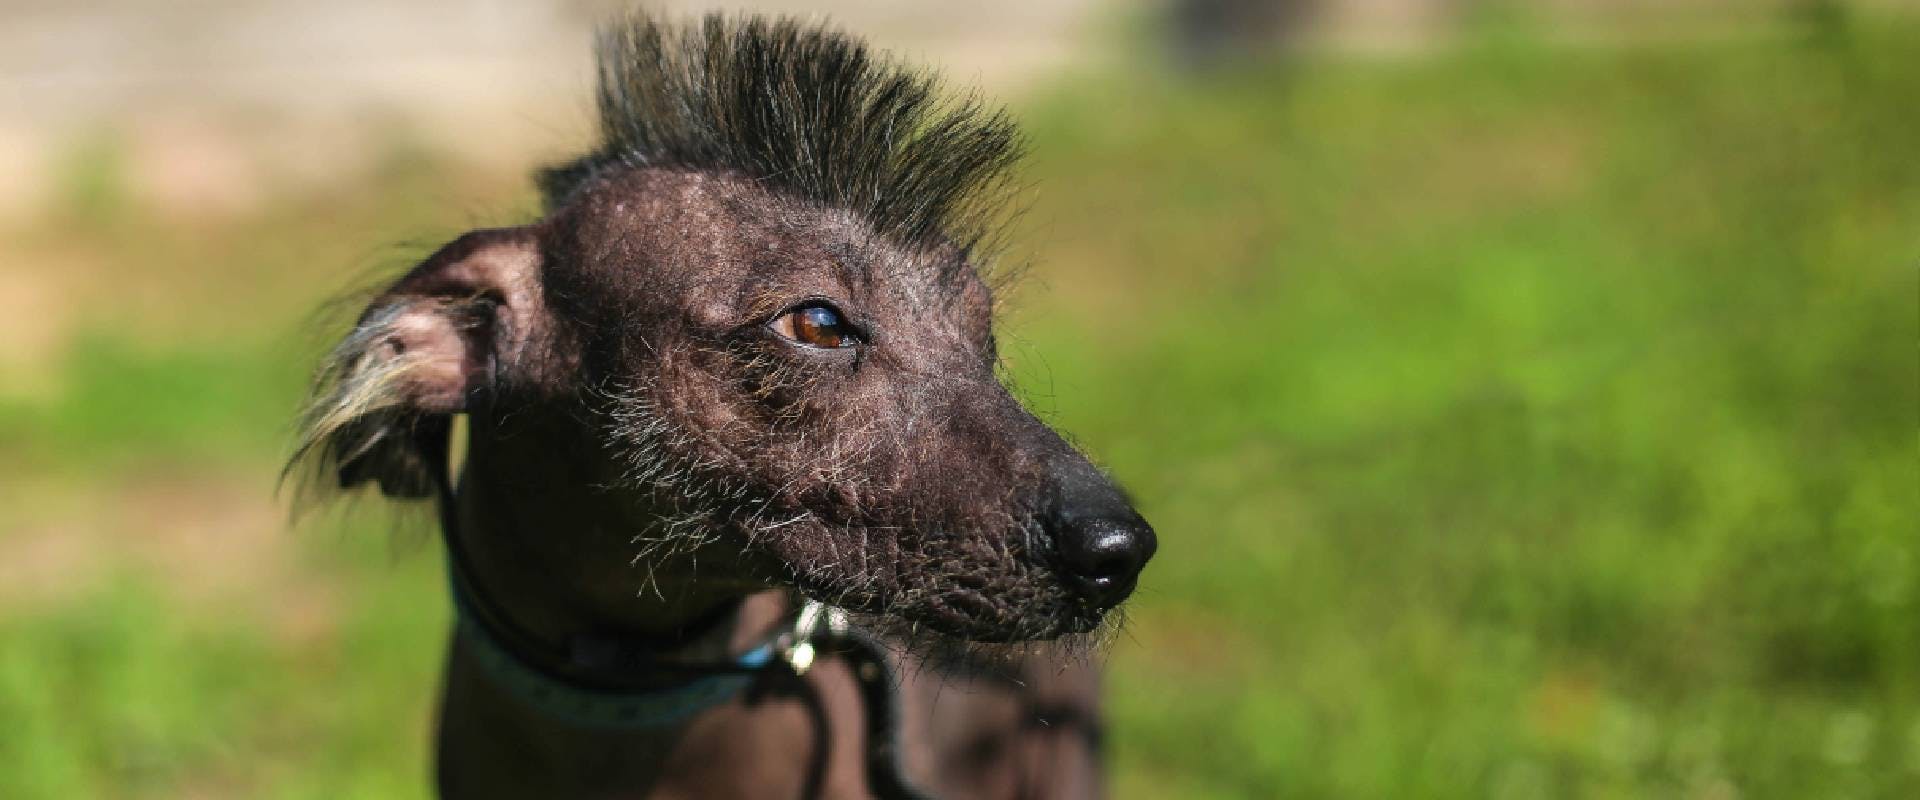 Xoloitzcuintli with a tuft of hair on top of its head